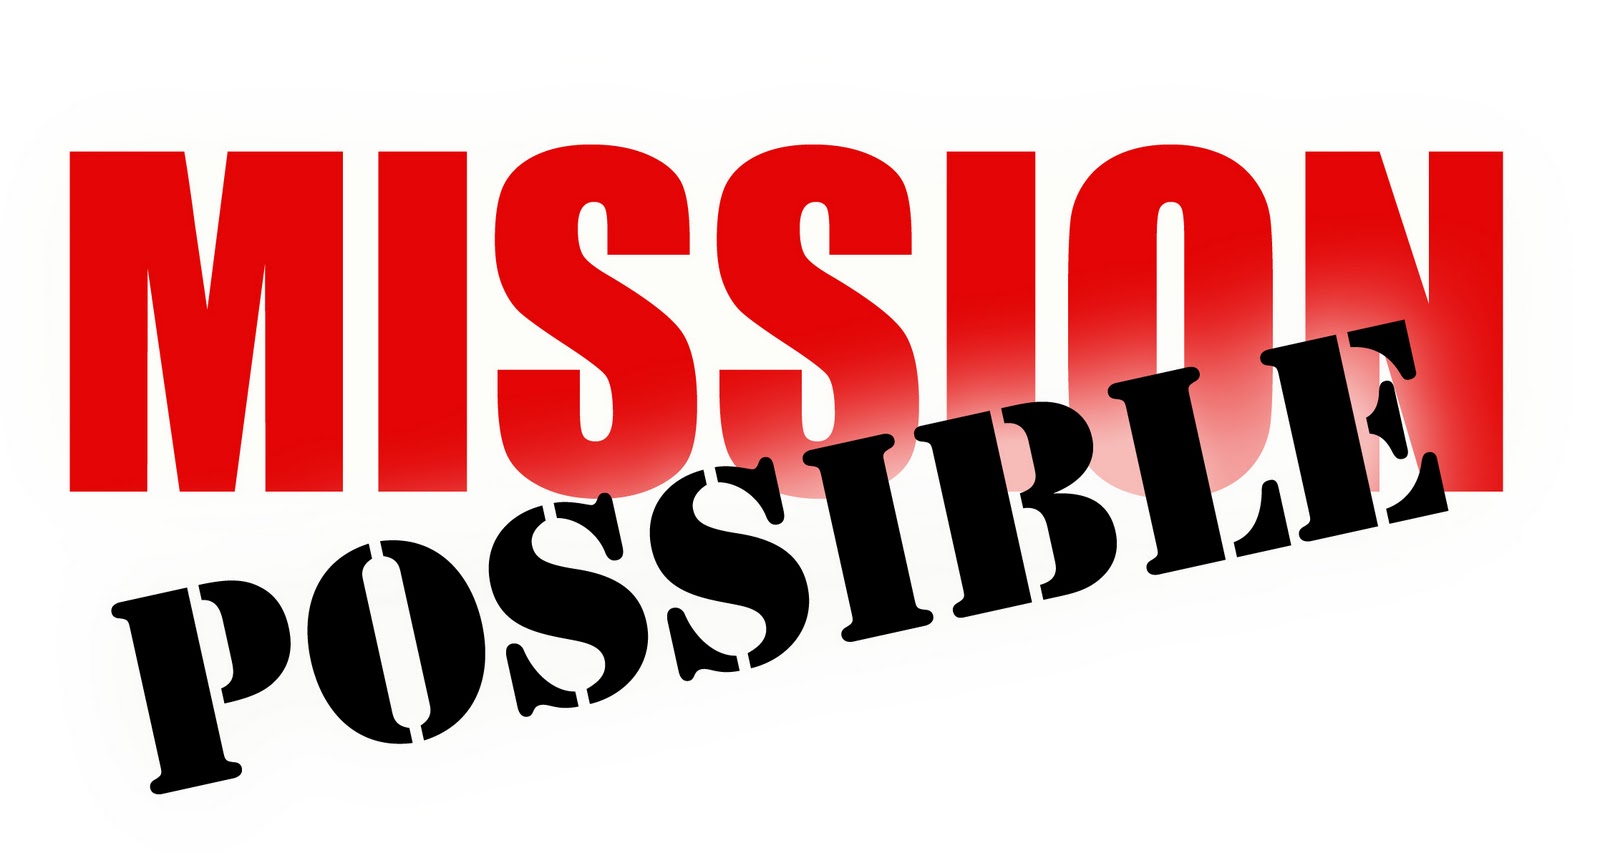 free christian missions clipart - photo #43